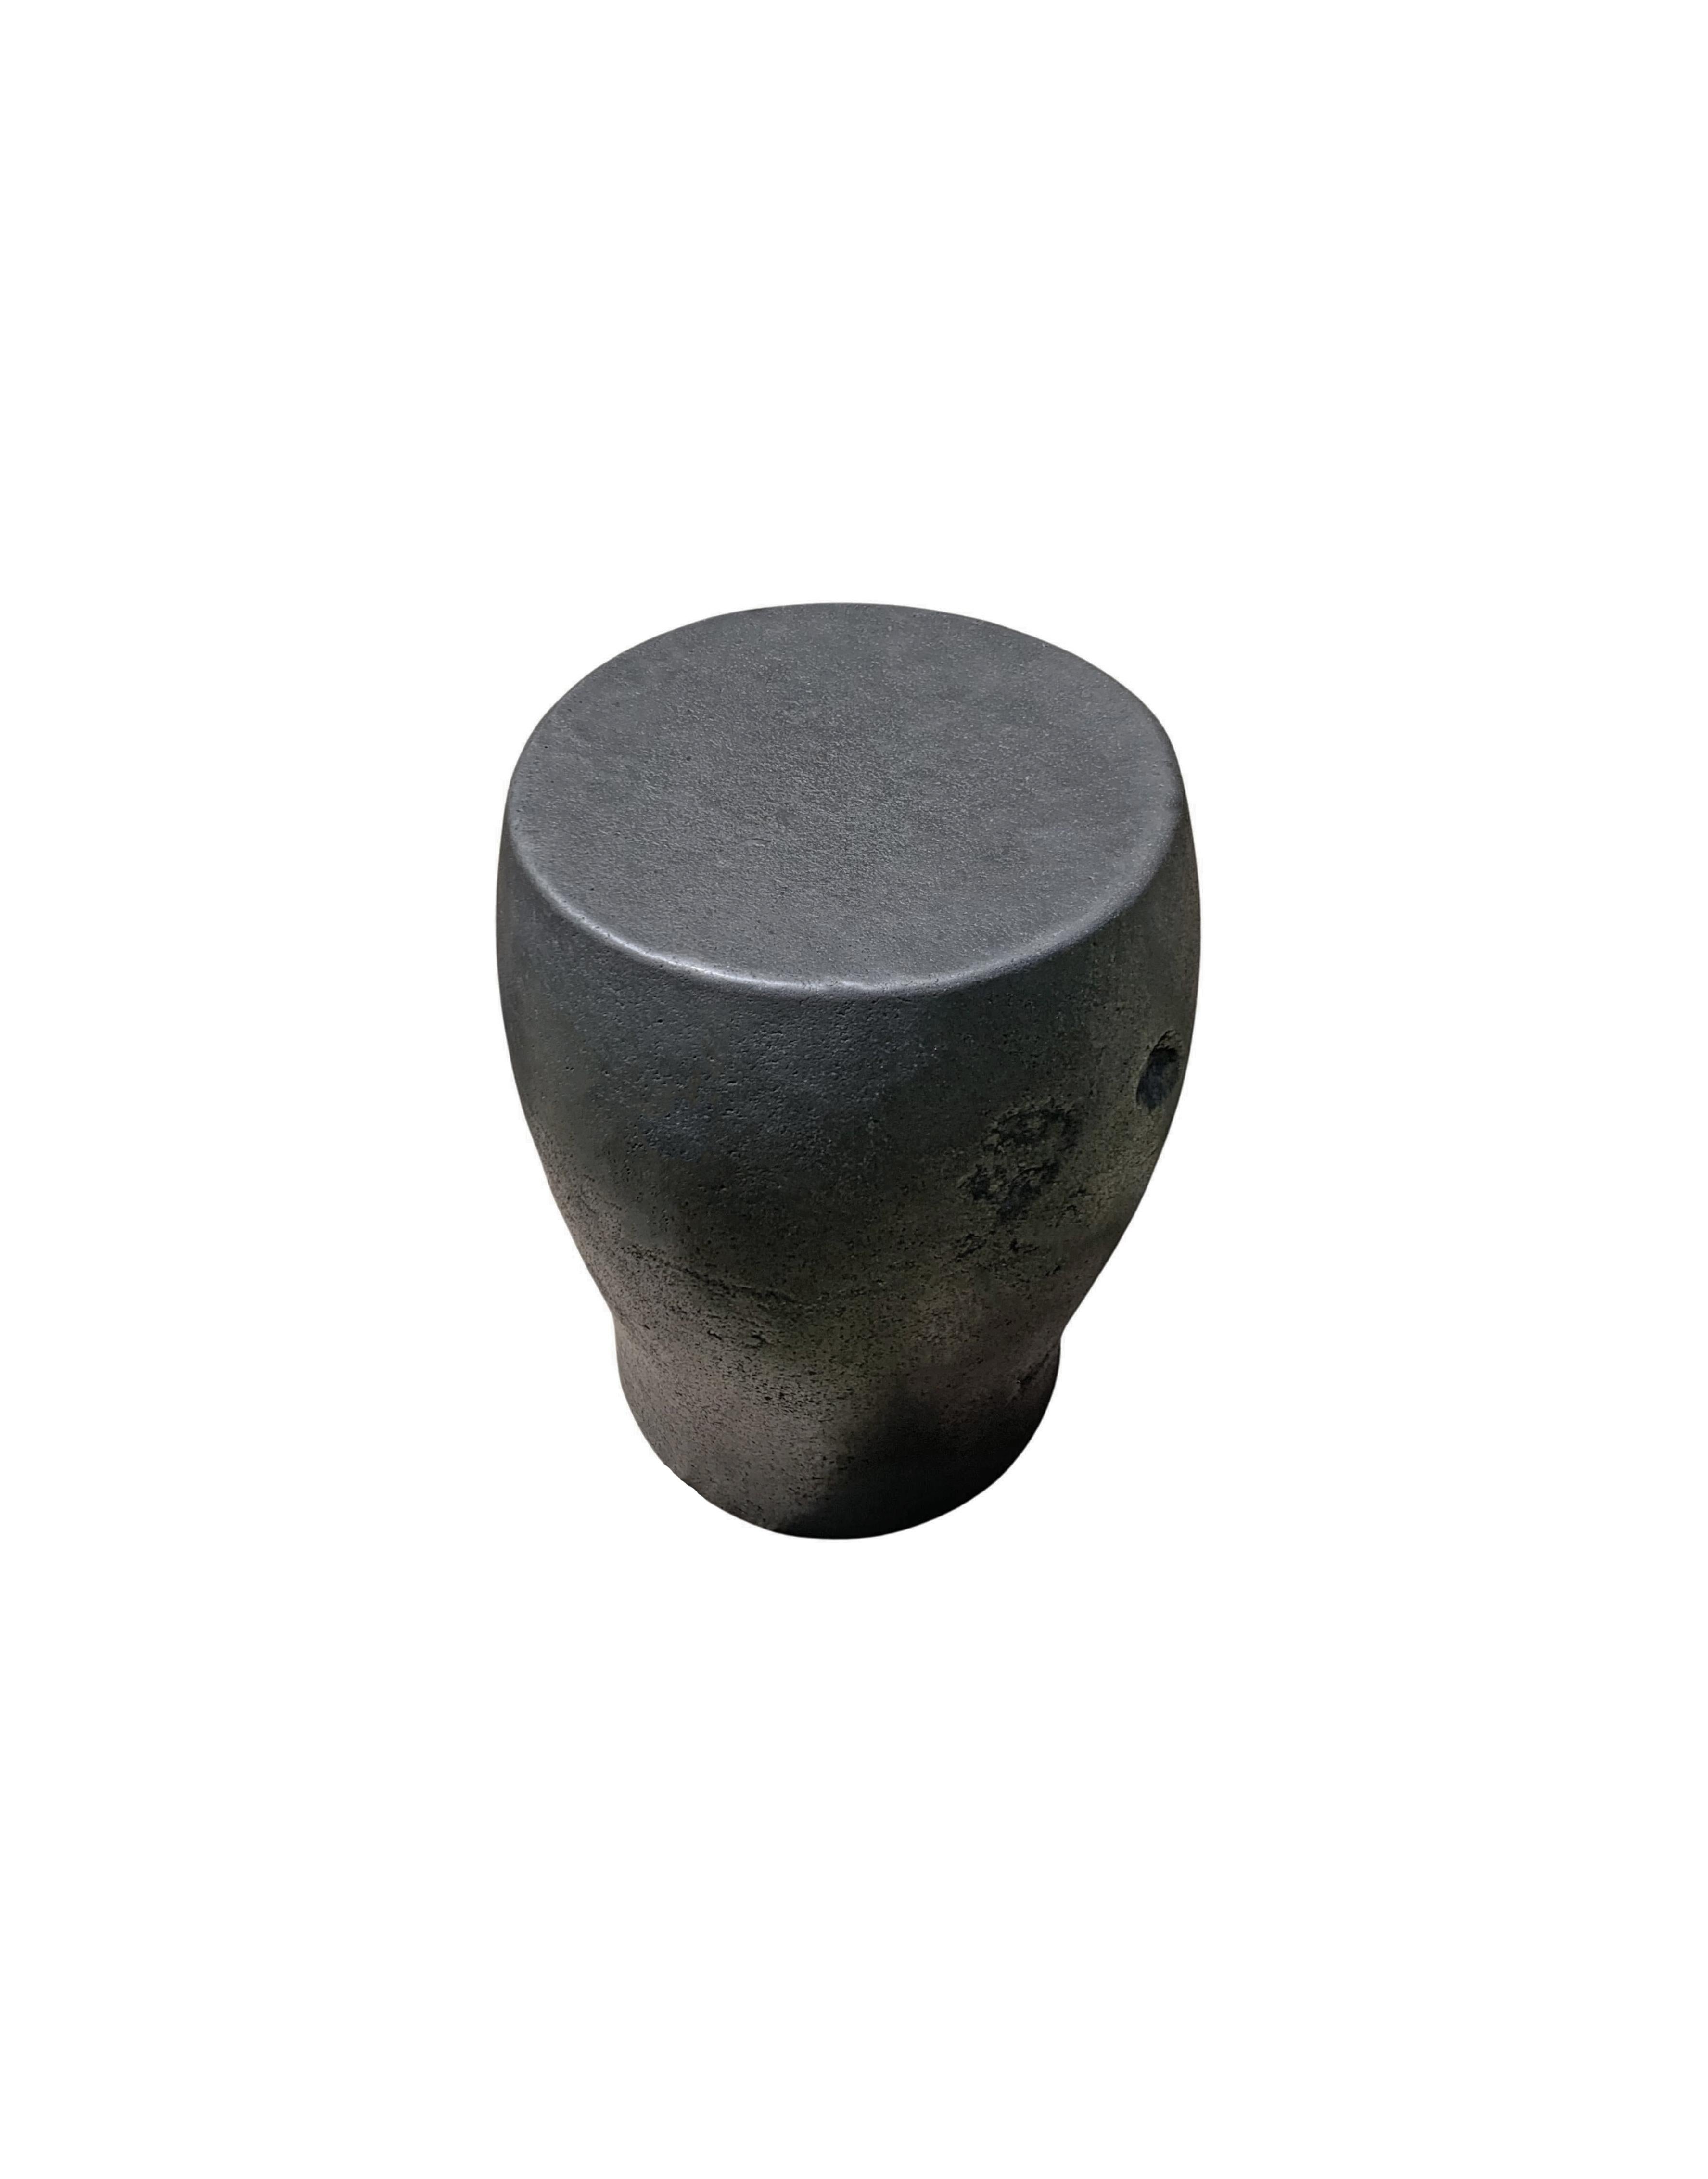 Organic Modern Solid Stone Side Table / Pedestal from Java, Indonesia